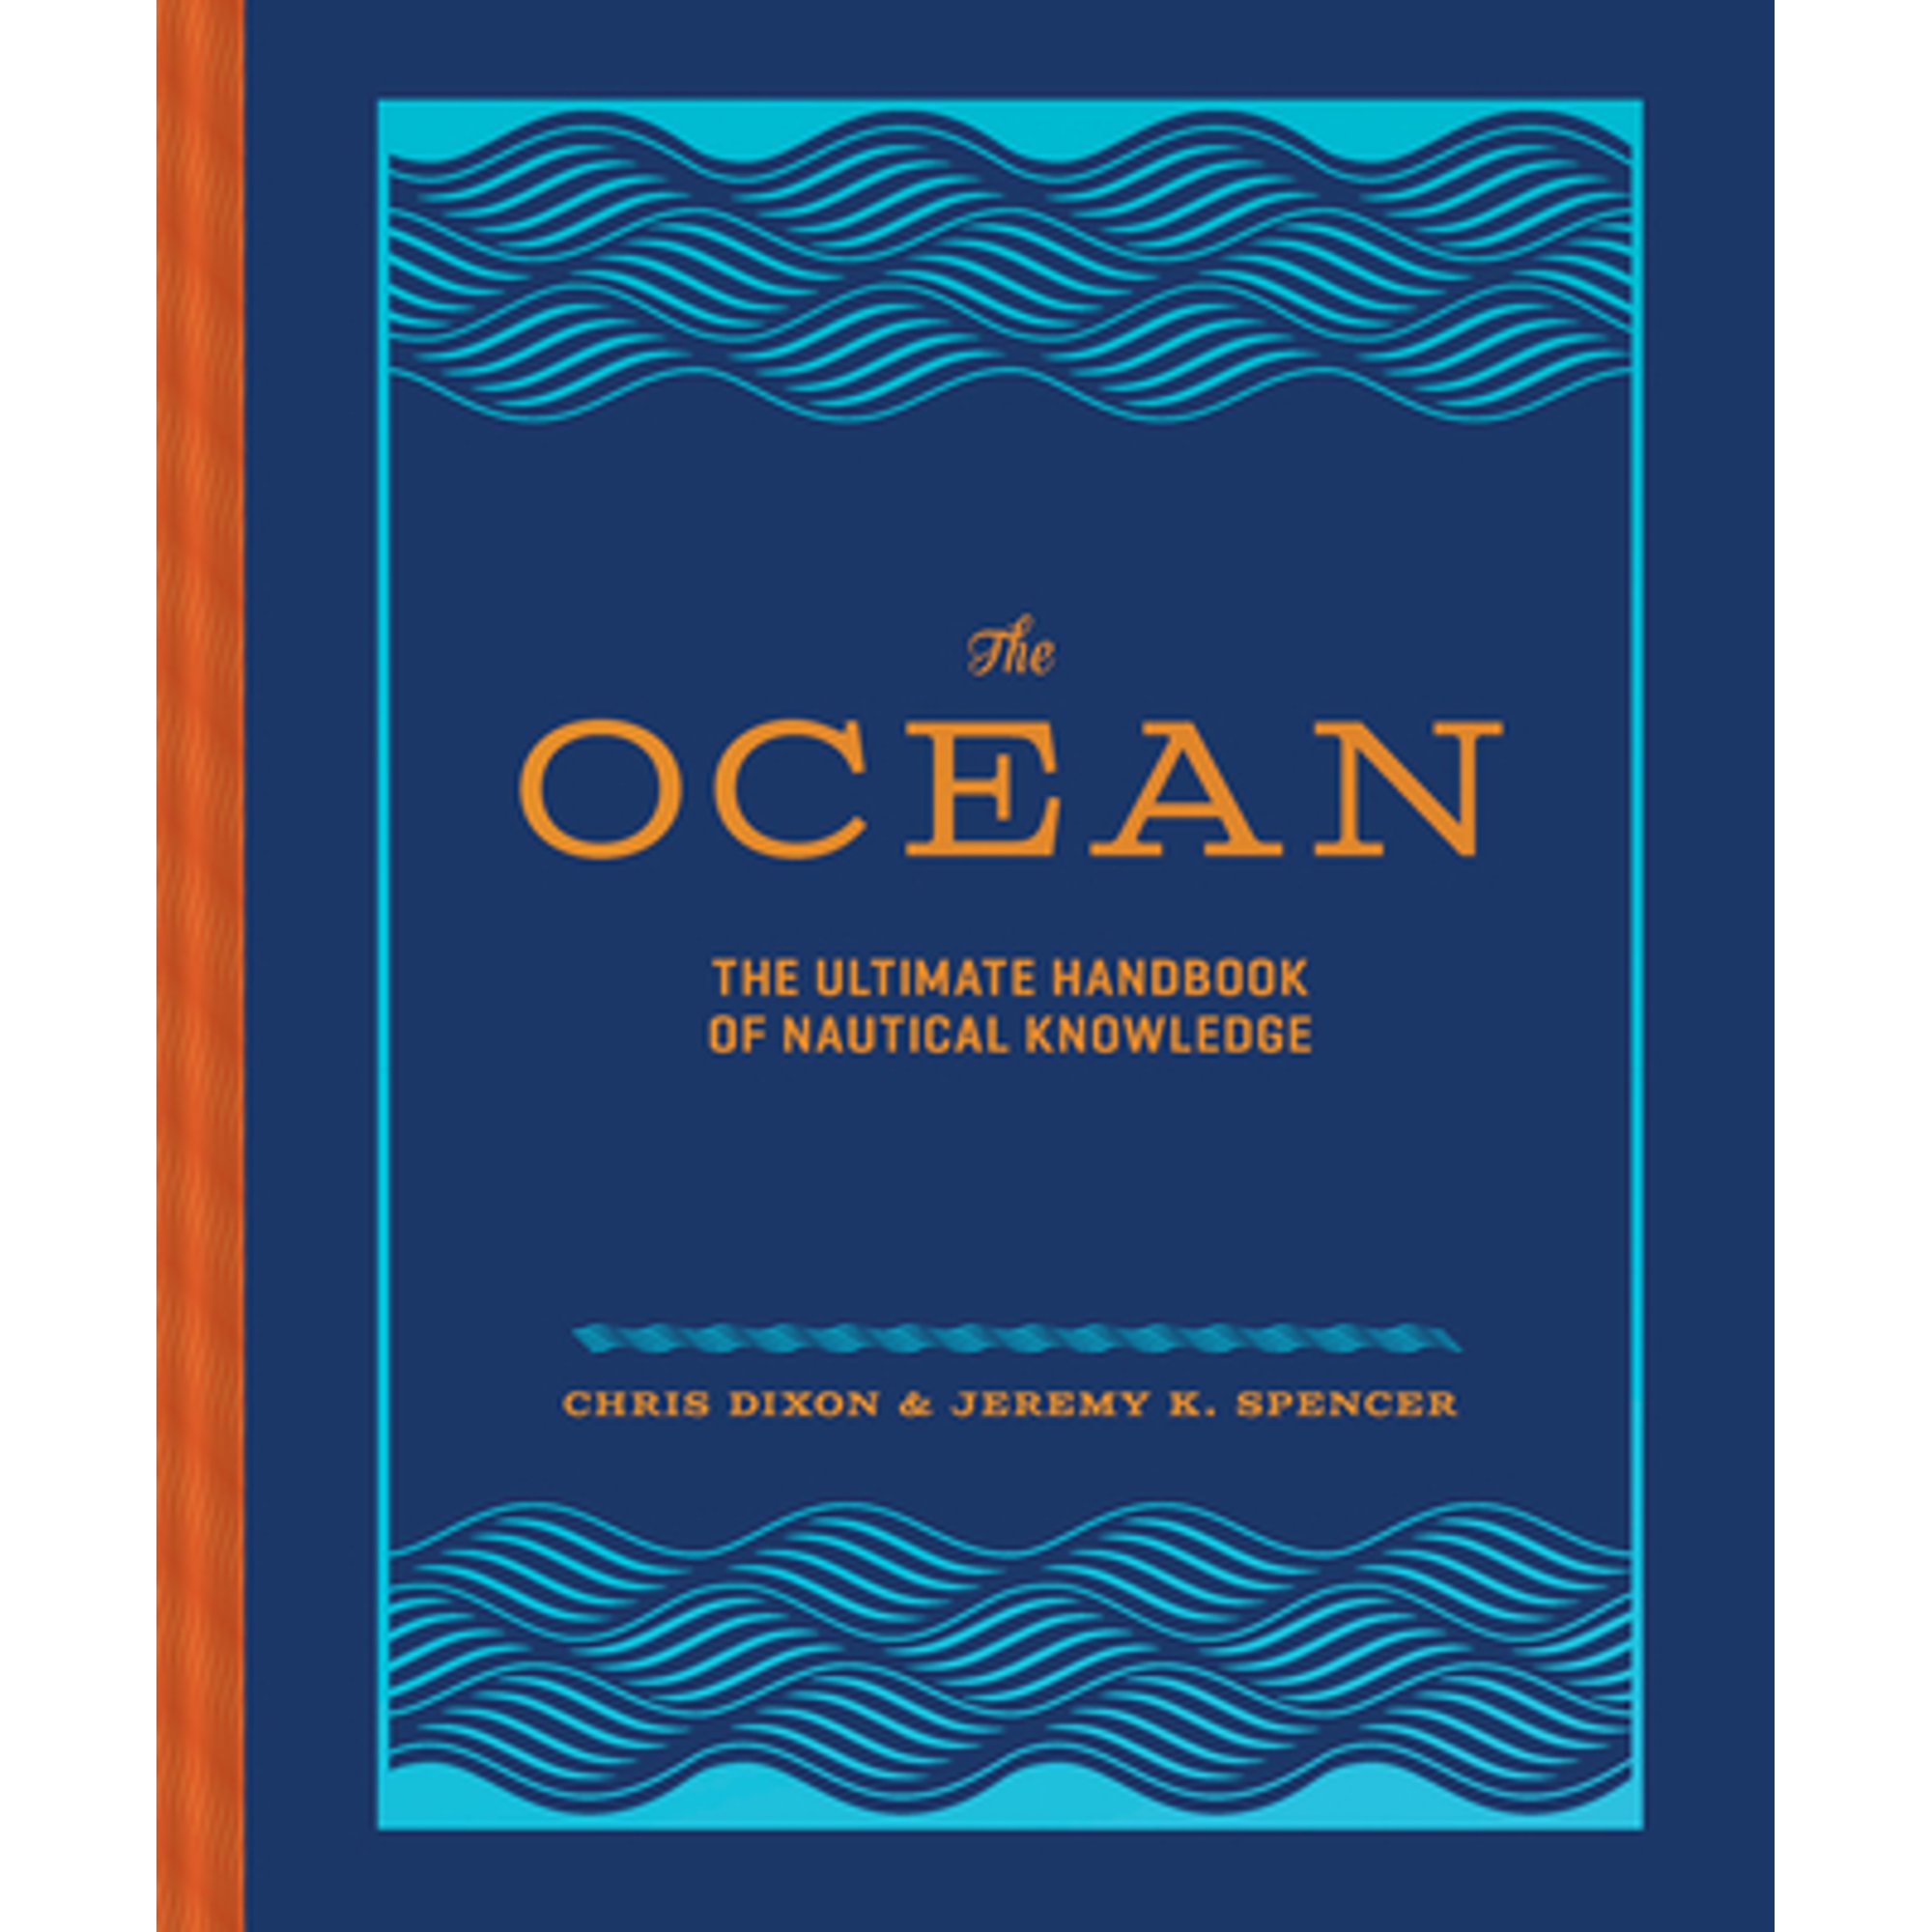 The Ocean (Hardcover) - image 1 of 1